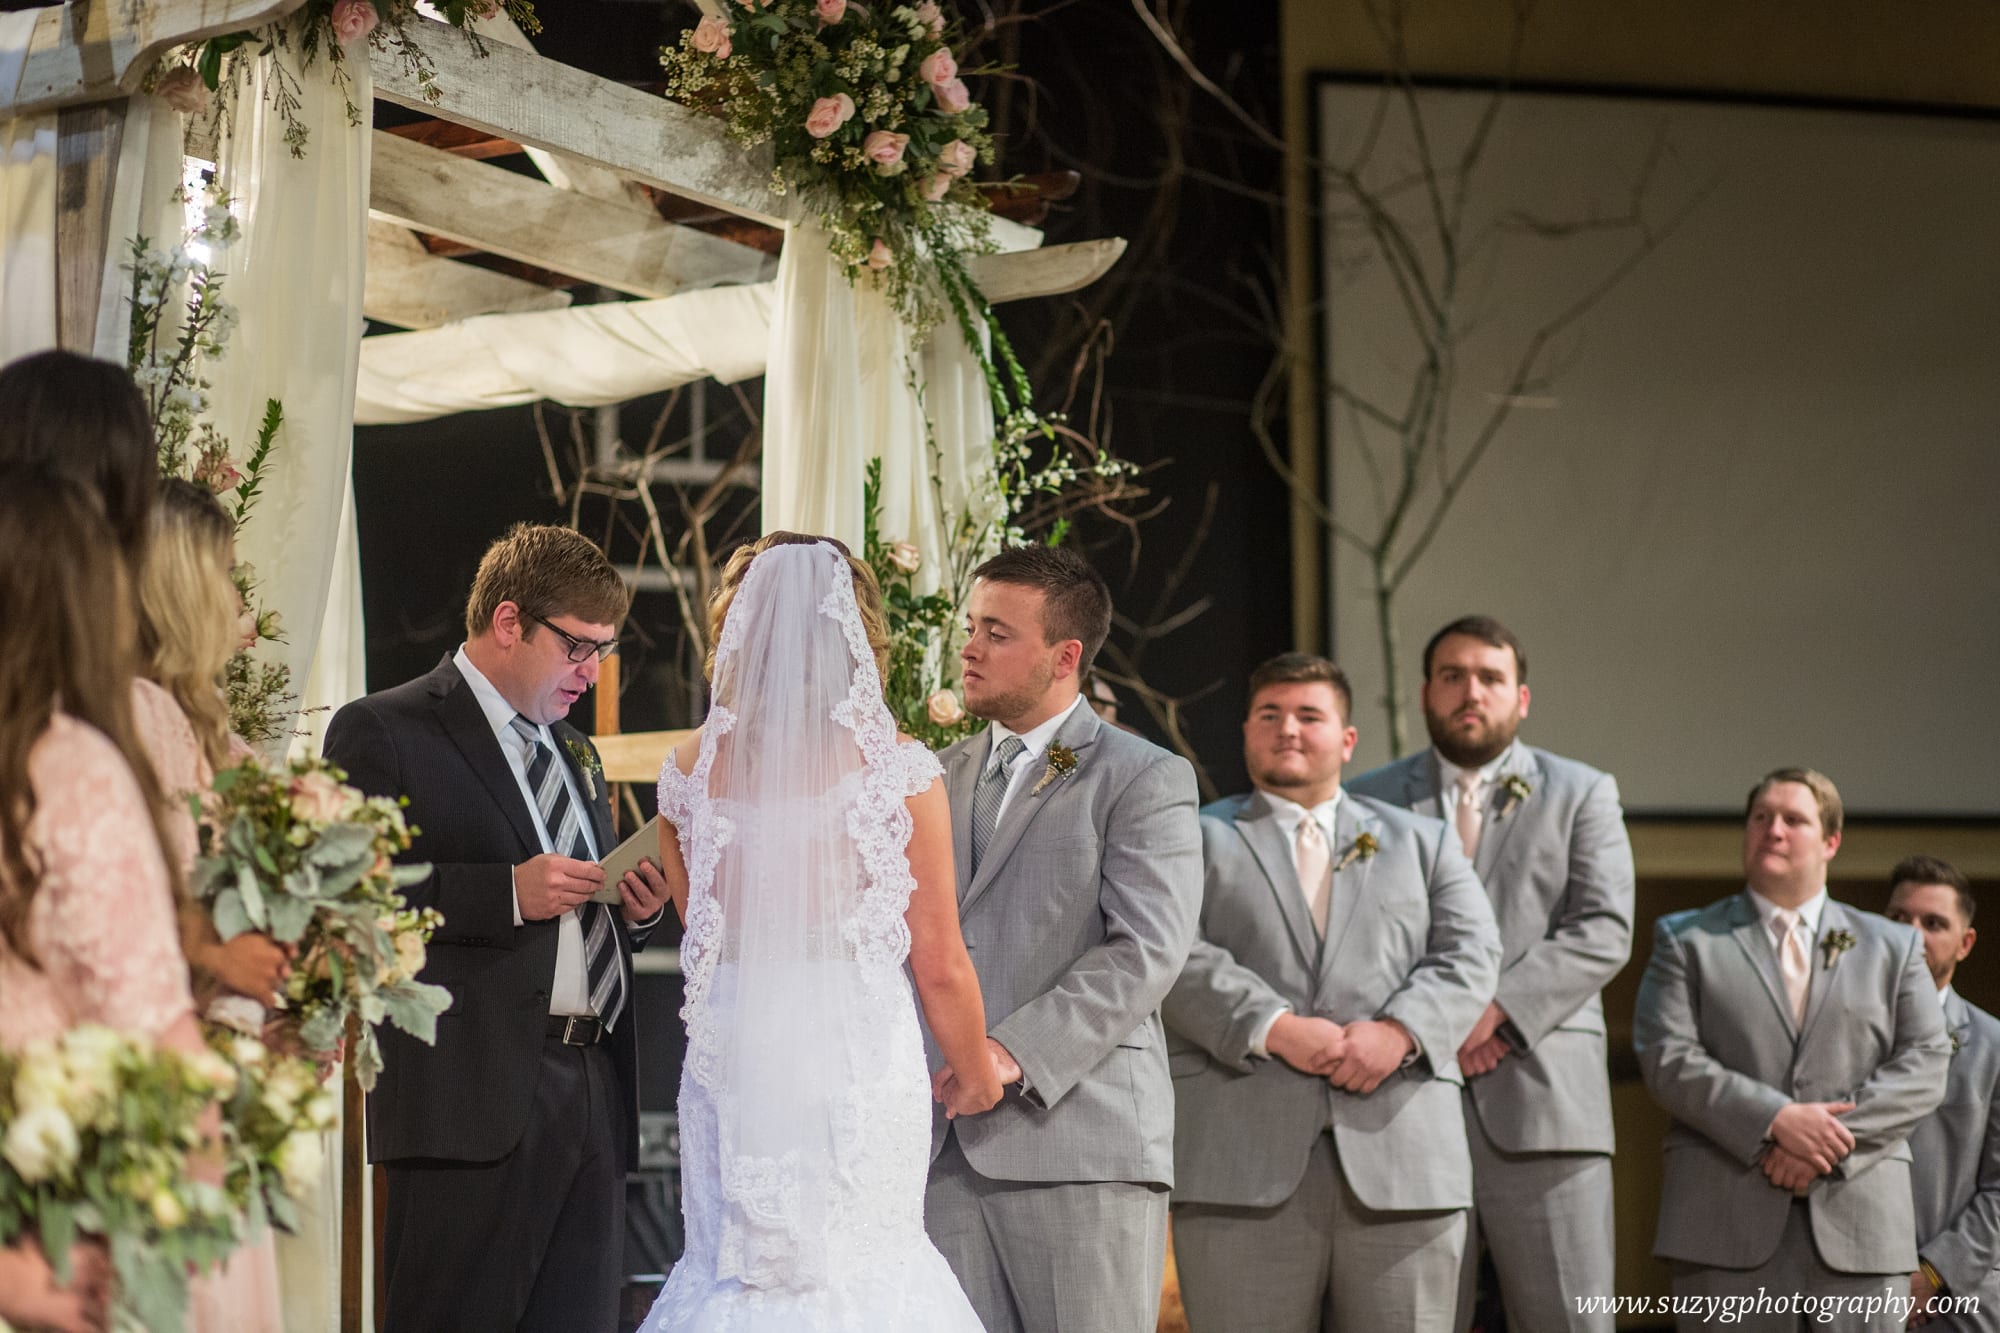 vows by victoria-lake charles-wedding-photography-suzy g-photography-suzygphotography_0048